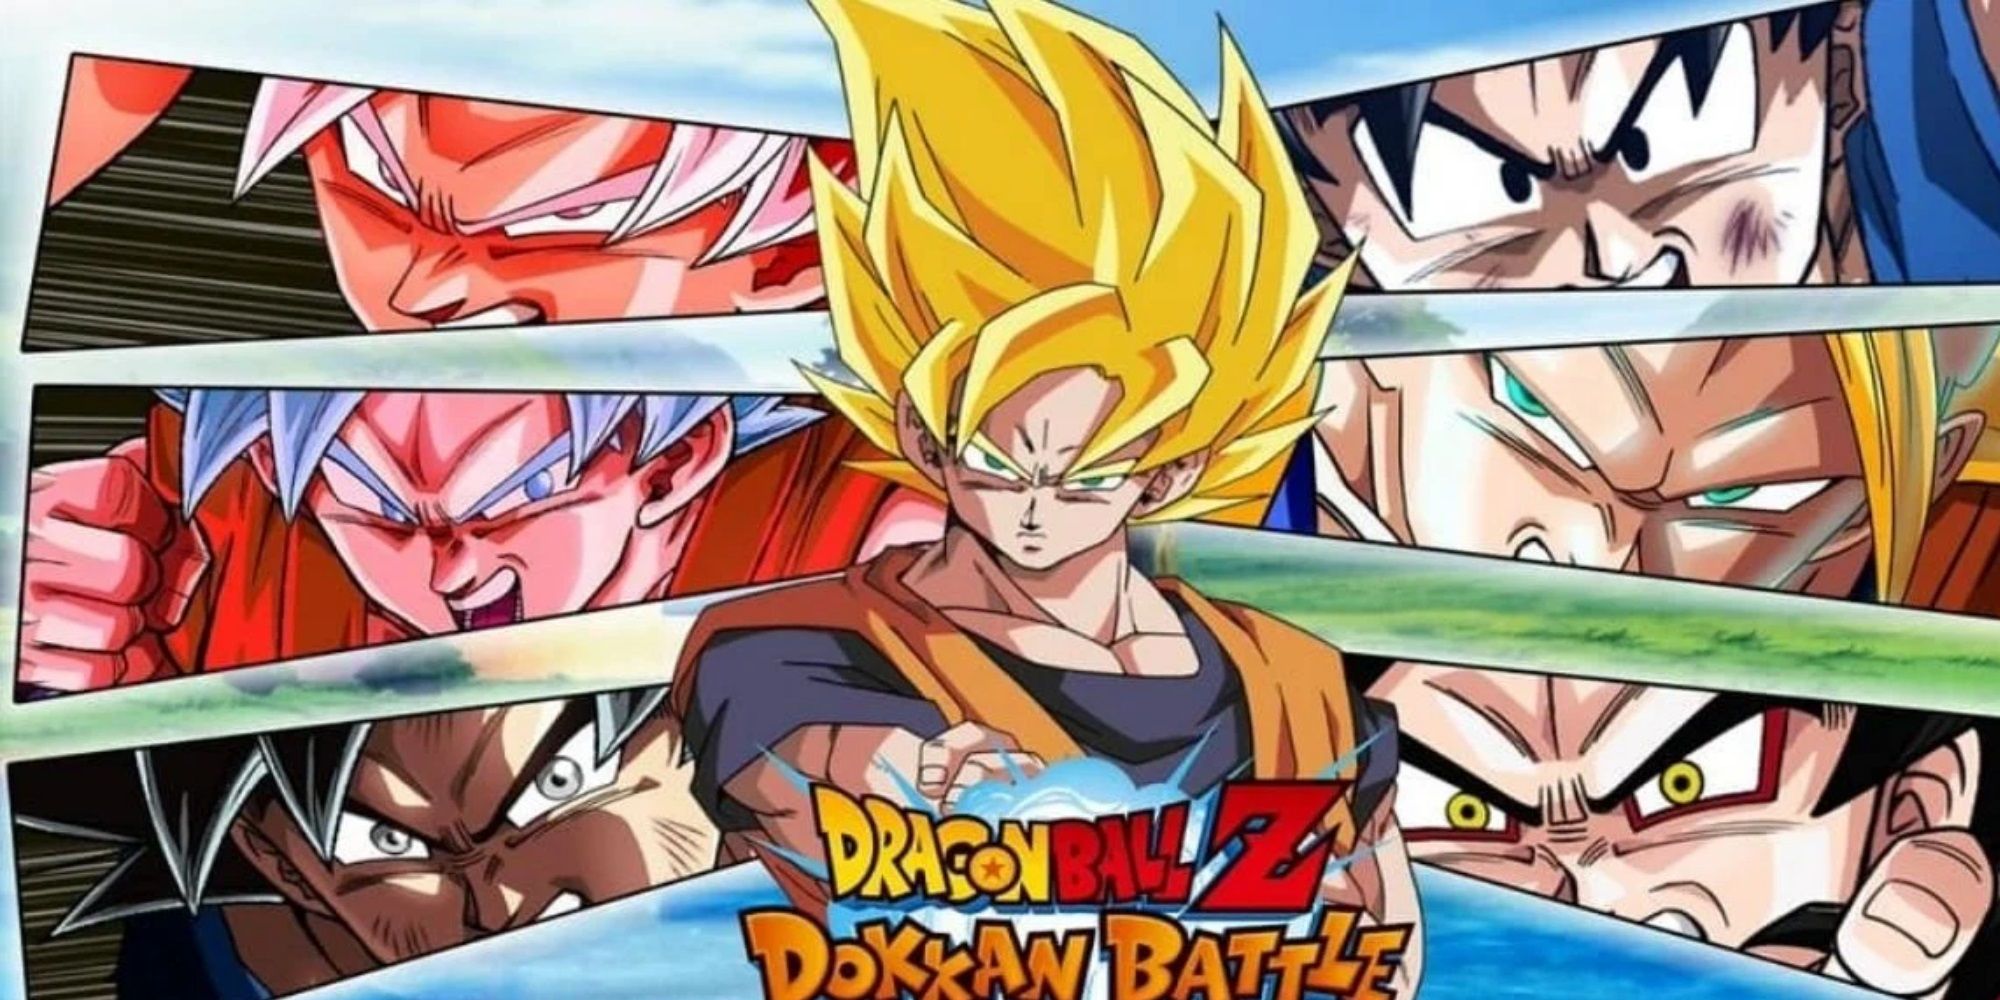 Dokkan Battle - Many Characters together